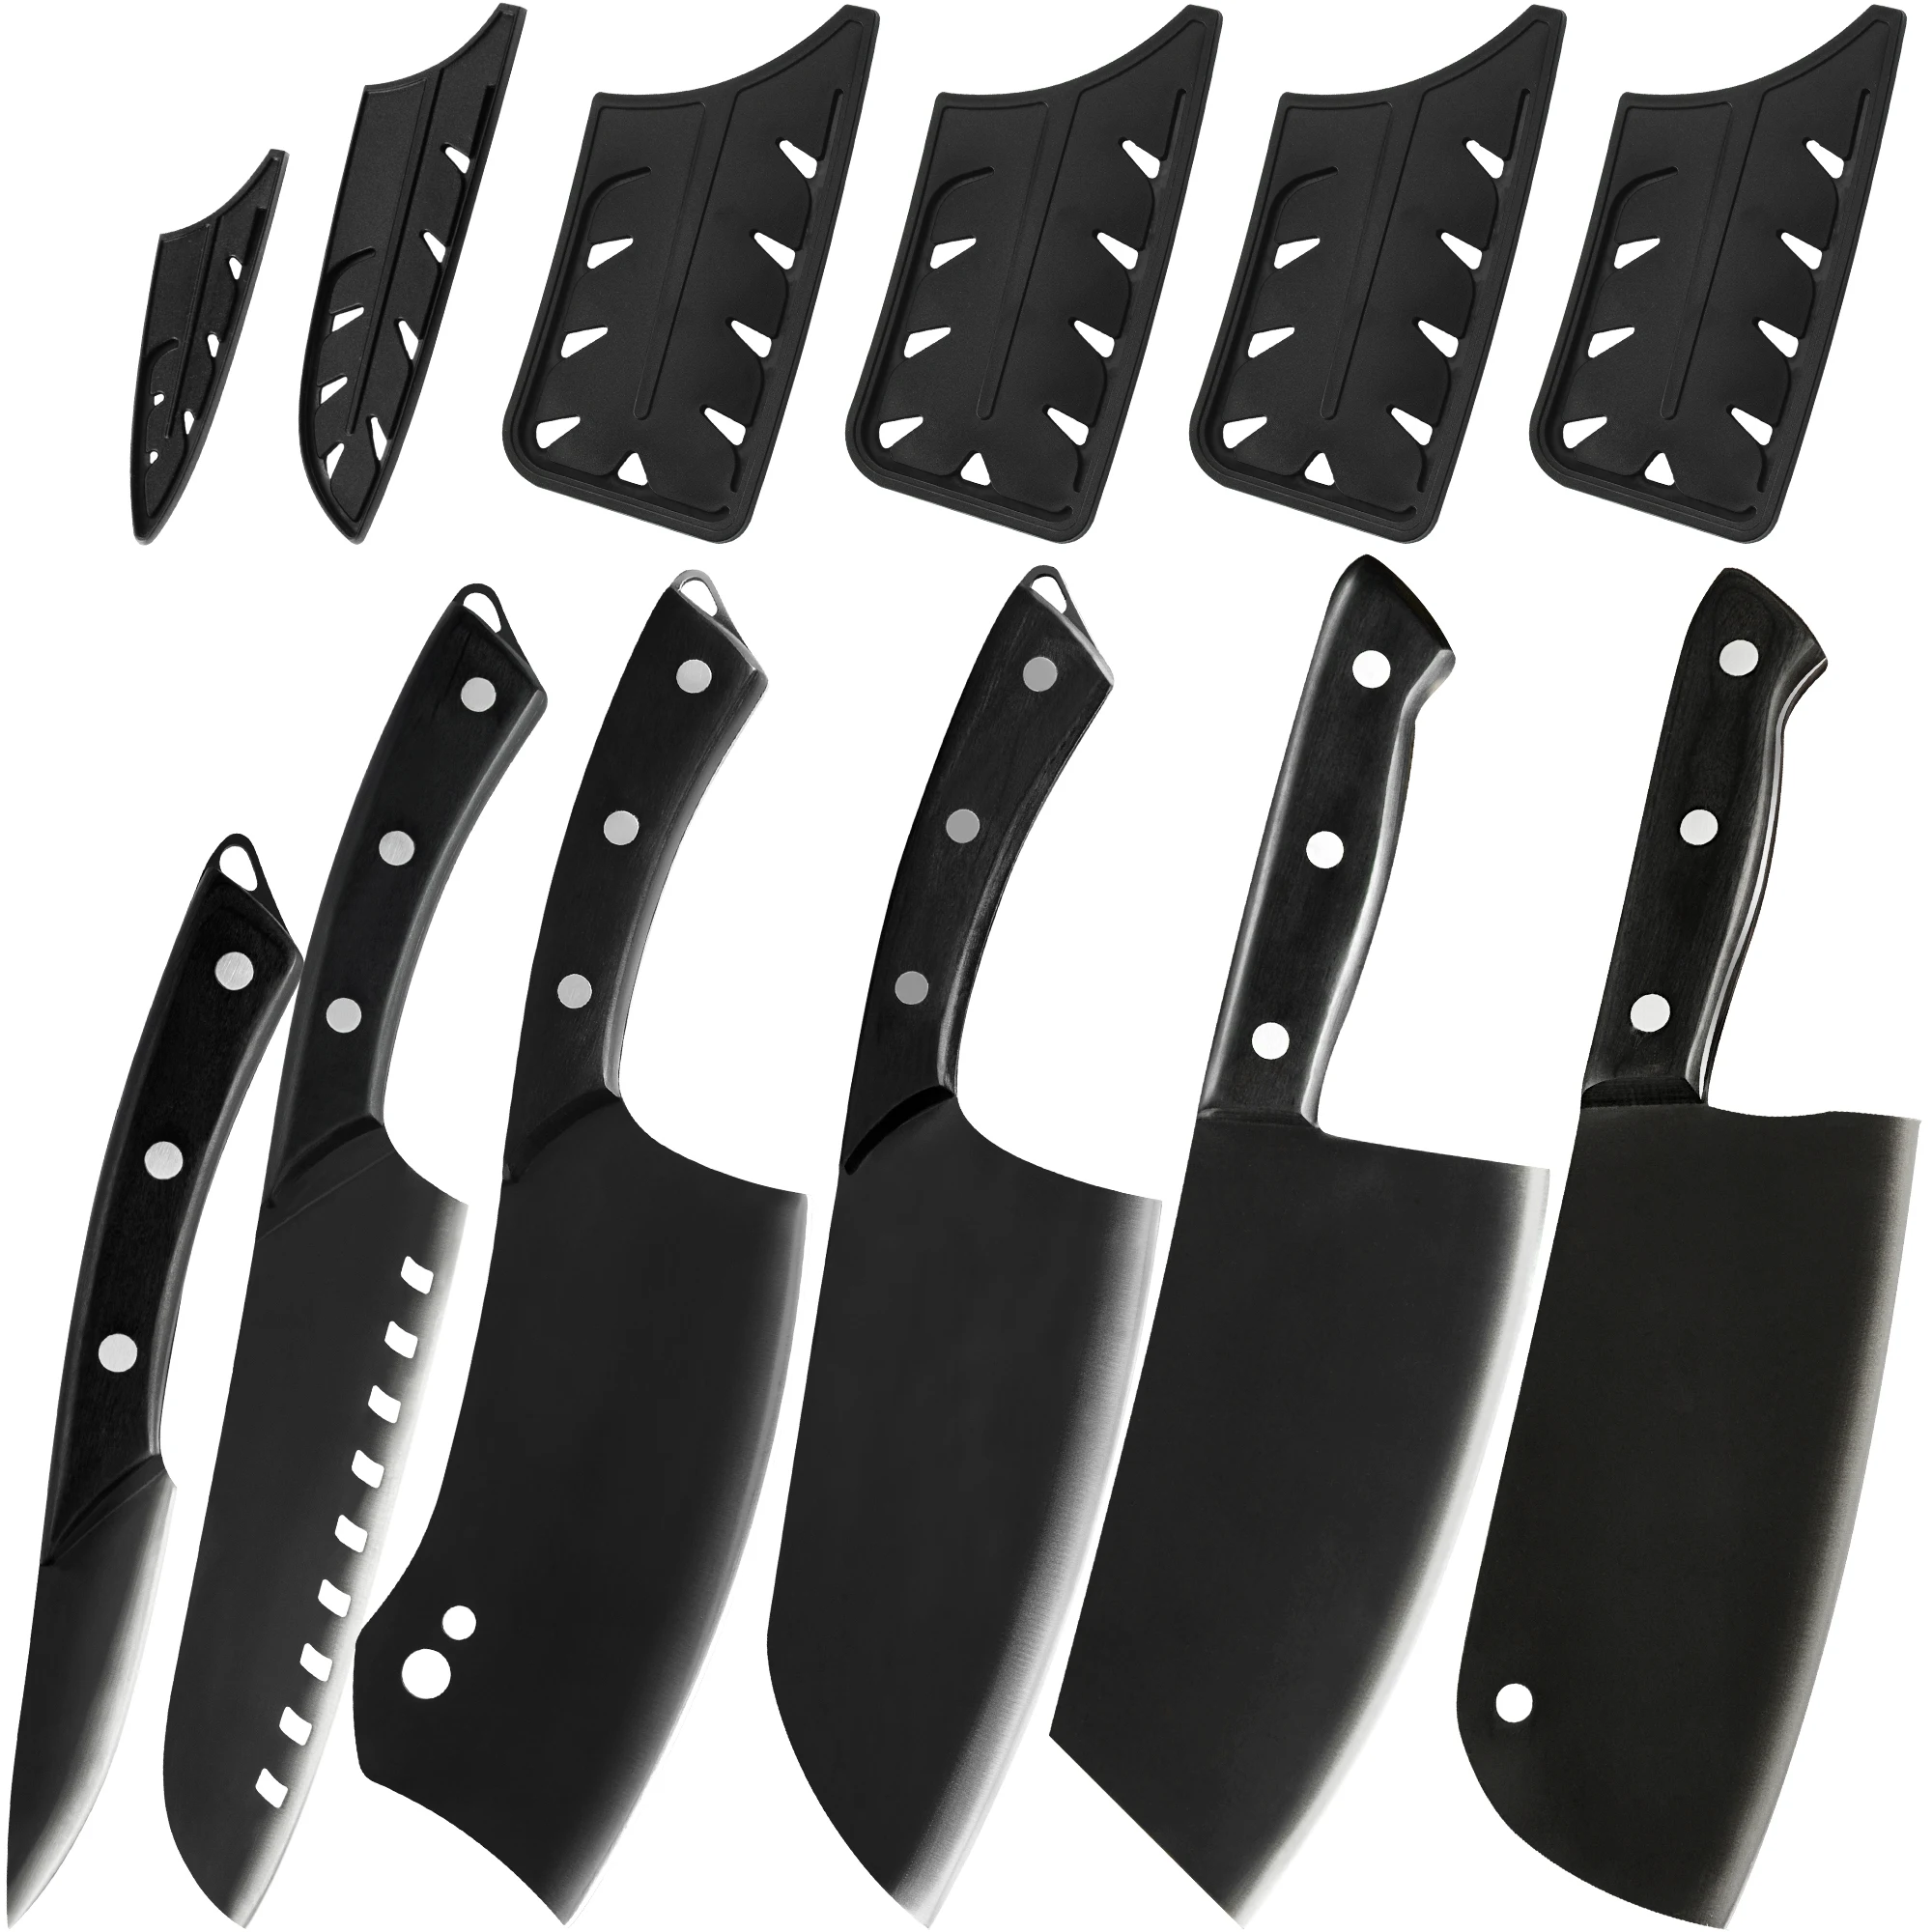 

XYj 6 Pieces Knives Set Full Tang Kitchen Cutlery Stainless Steel Meat Cleaver Butcher Knives Chef Knives For Outdoor Camping